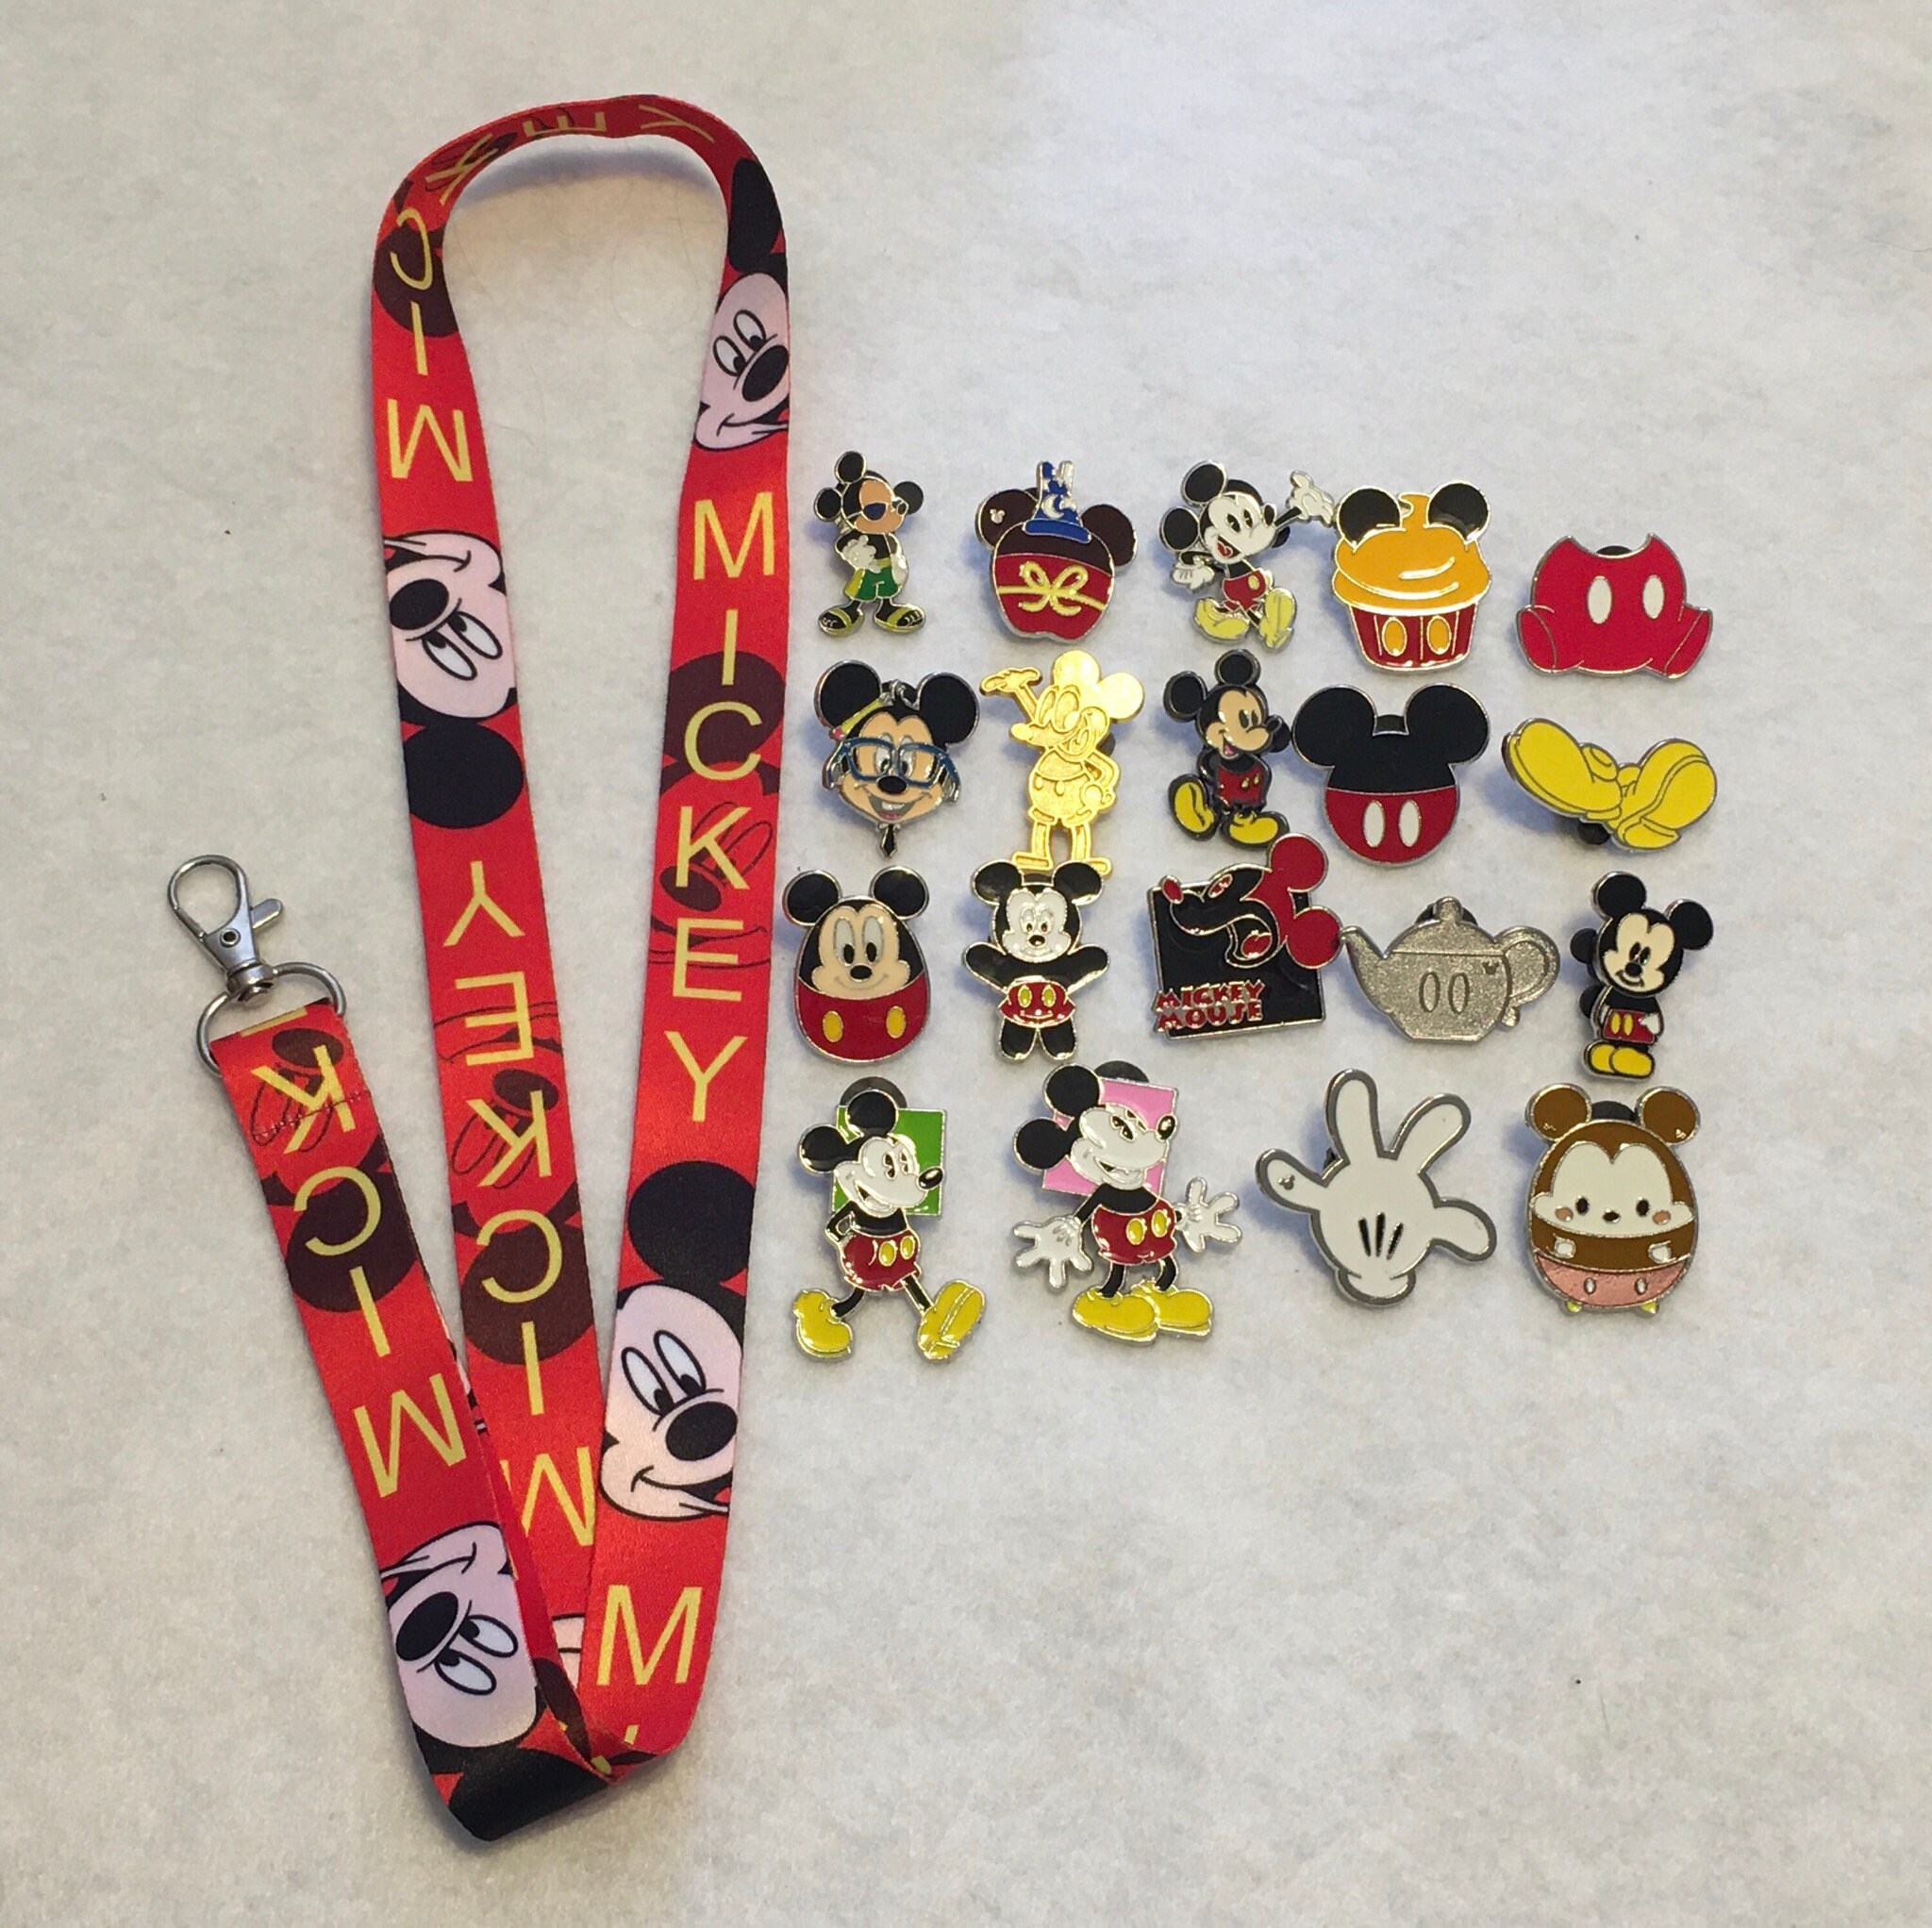 Disney: Mickey Mouse and the Gang Black Lanyard with ID Holder